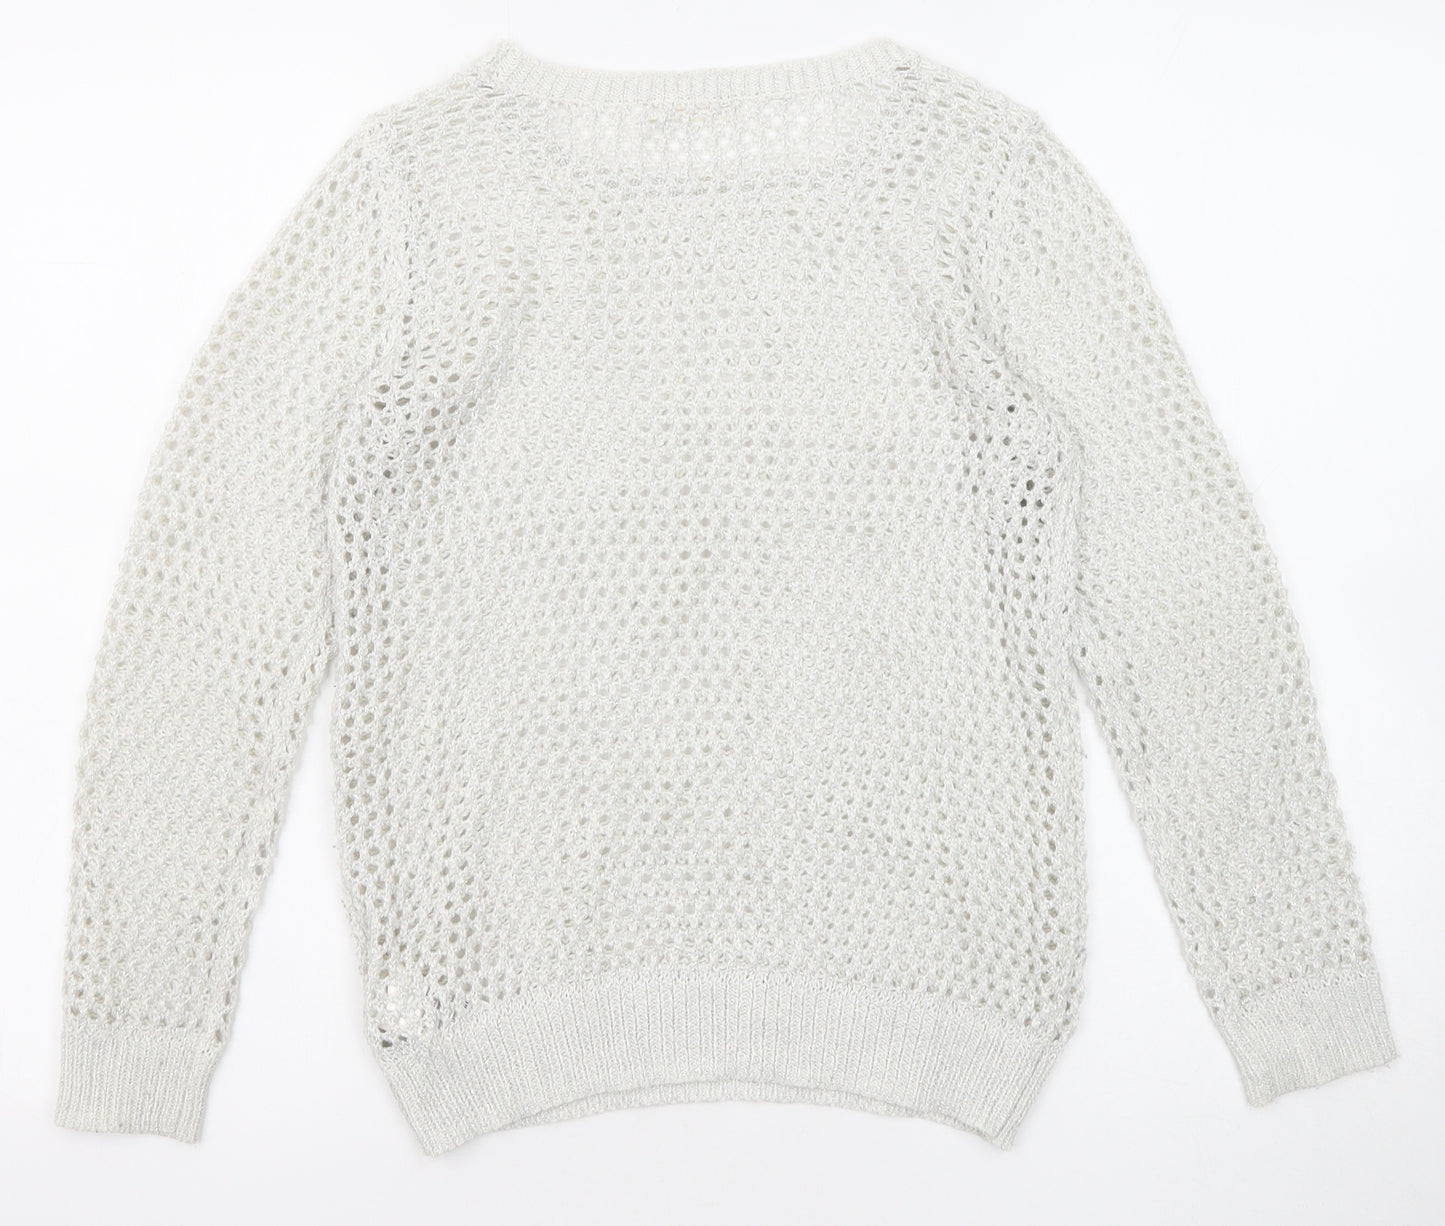 H&M Girls Ivory Boat Neck Acrylic Pullover Jumper Size 11-12 Years Pullover